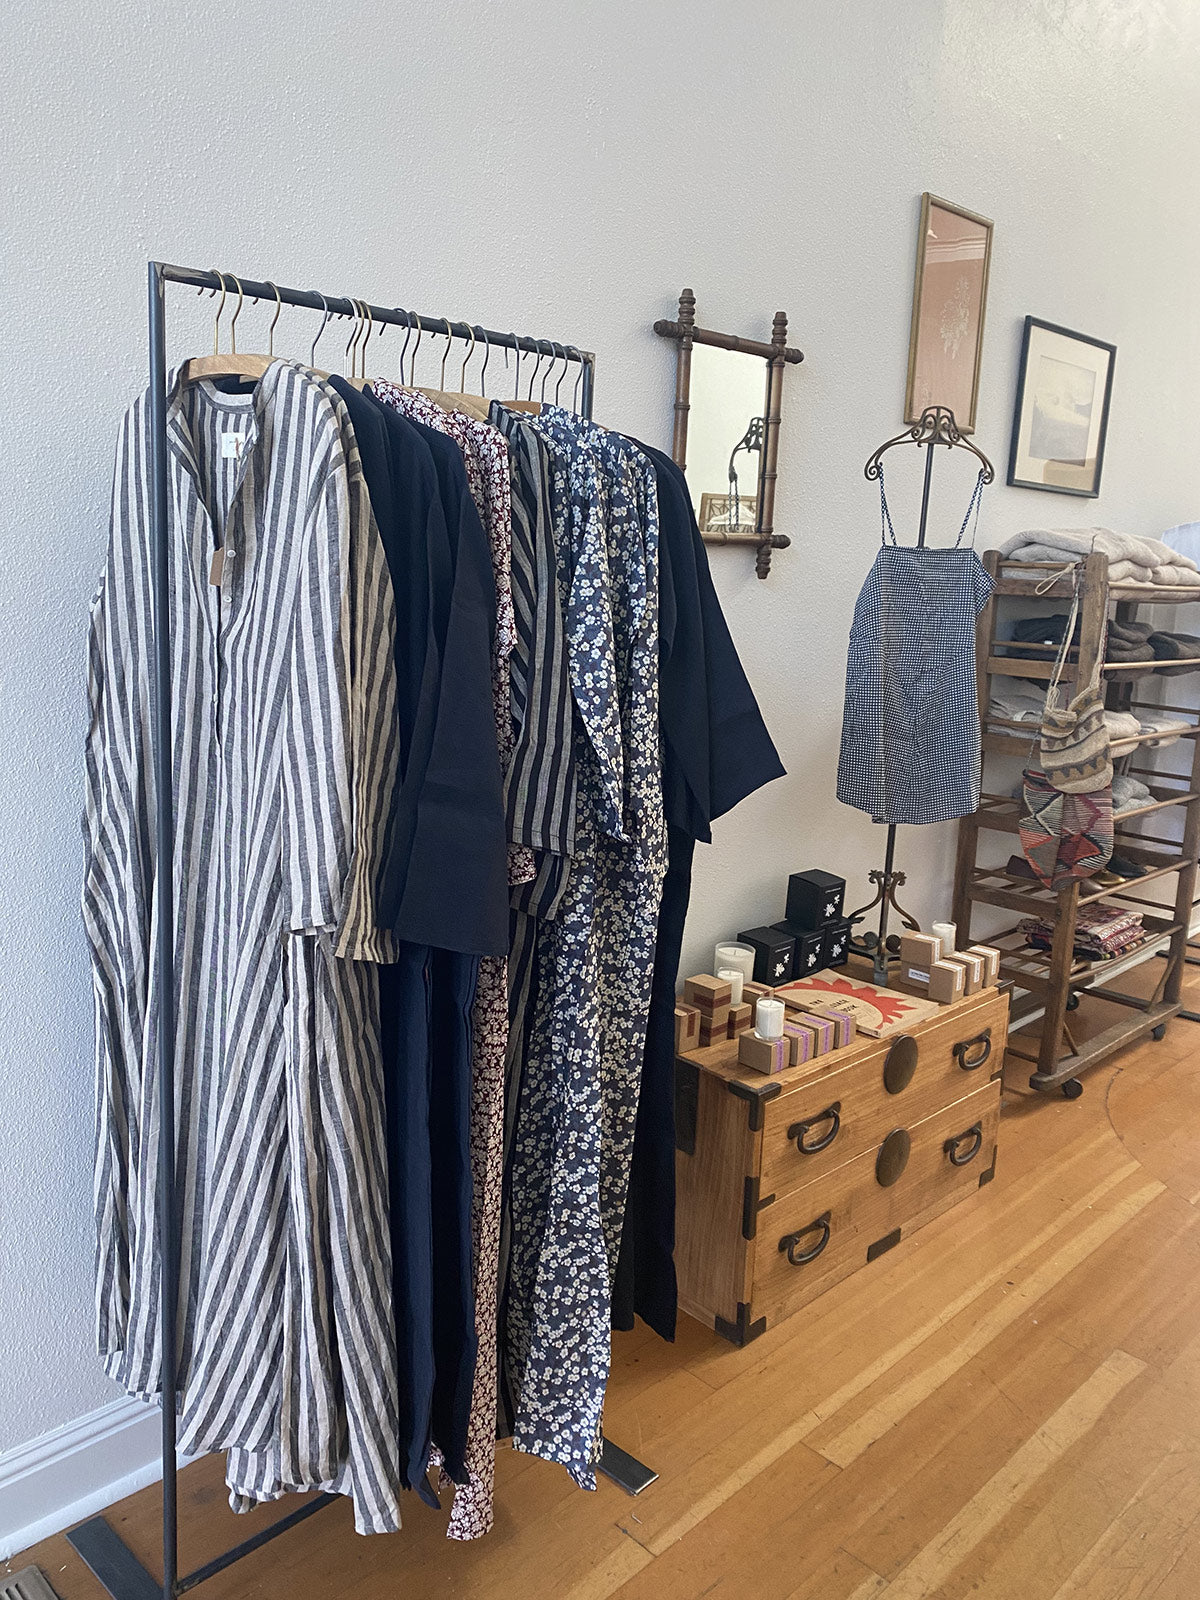 jess brown dresses and folded clothing in the jess brown shop